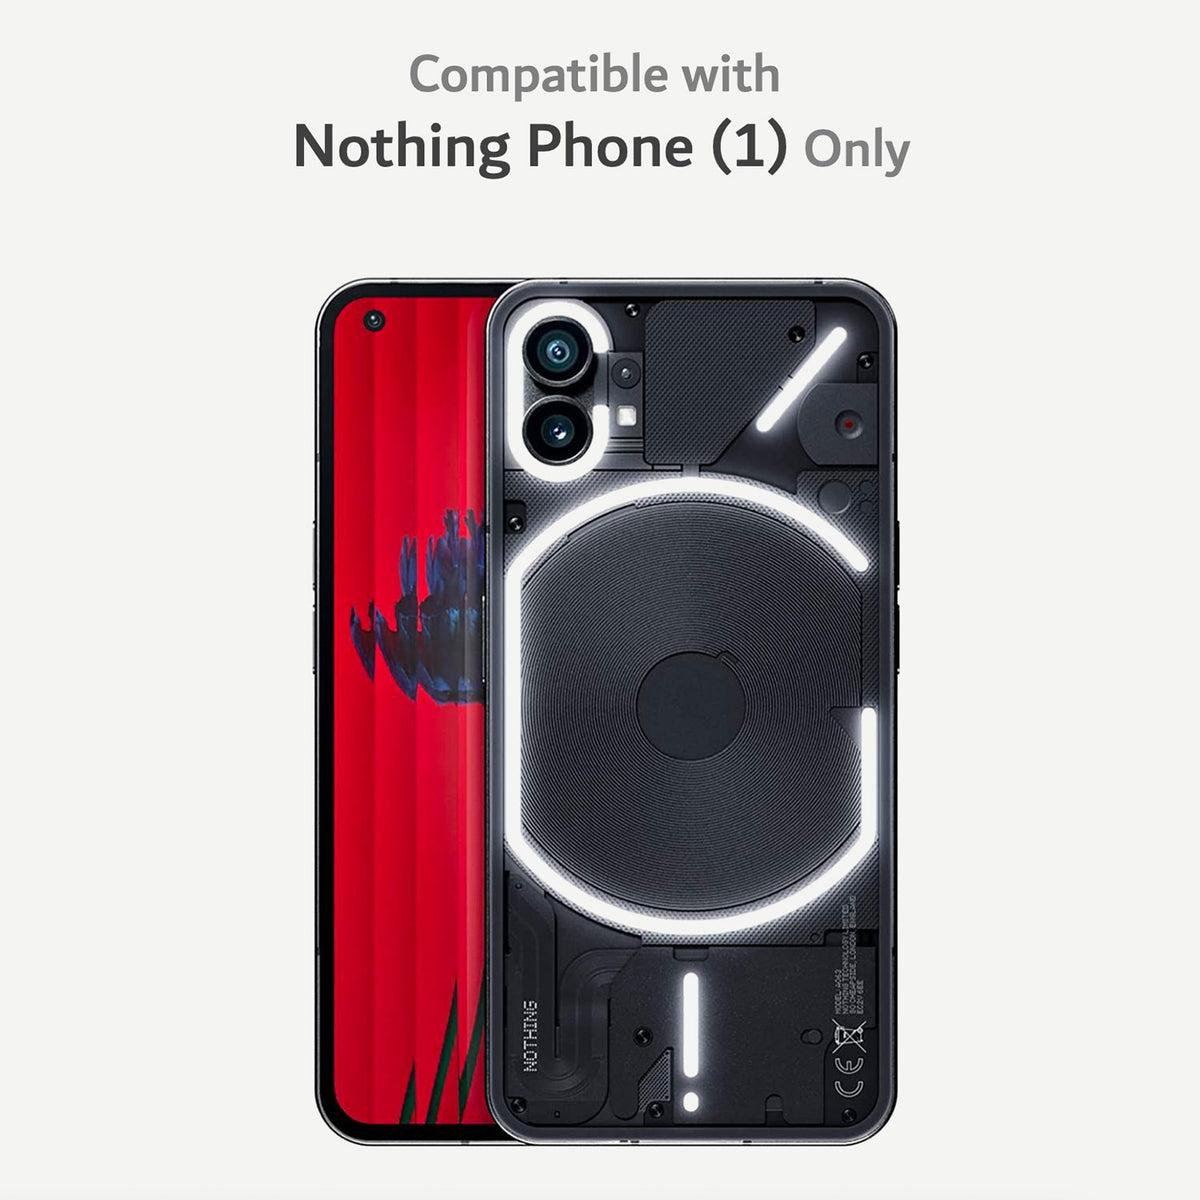 SBS TPU cover for Nothing Phone (1)